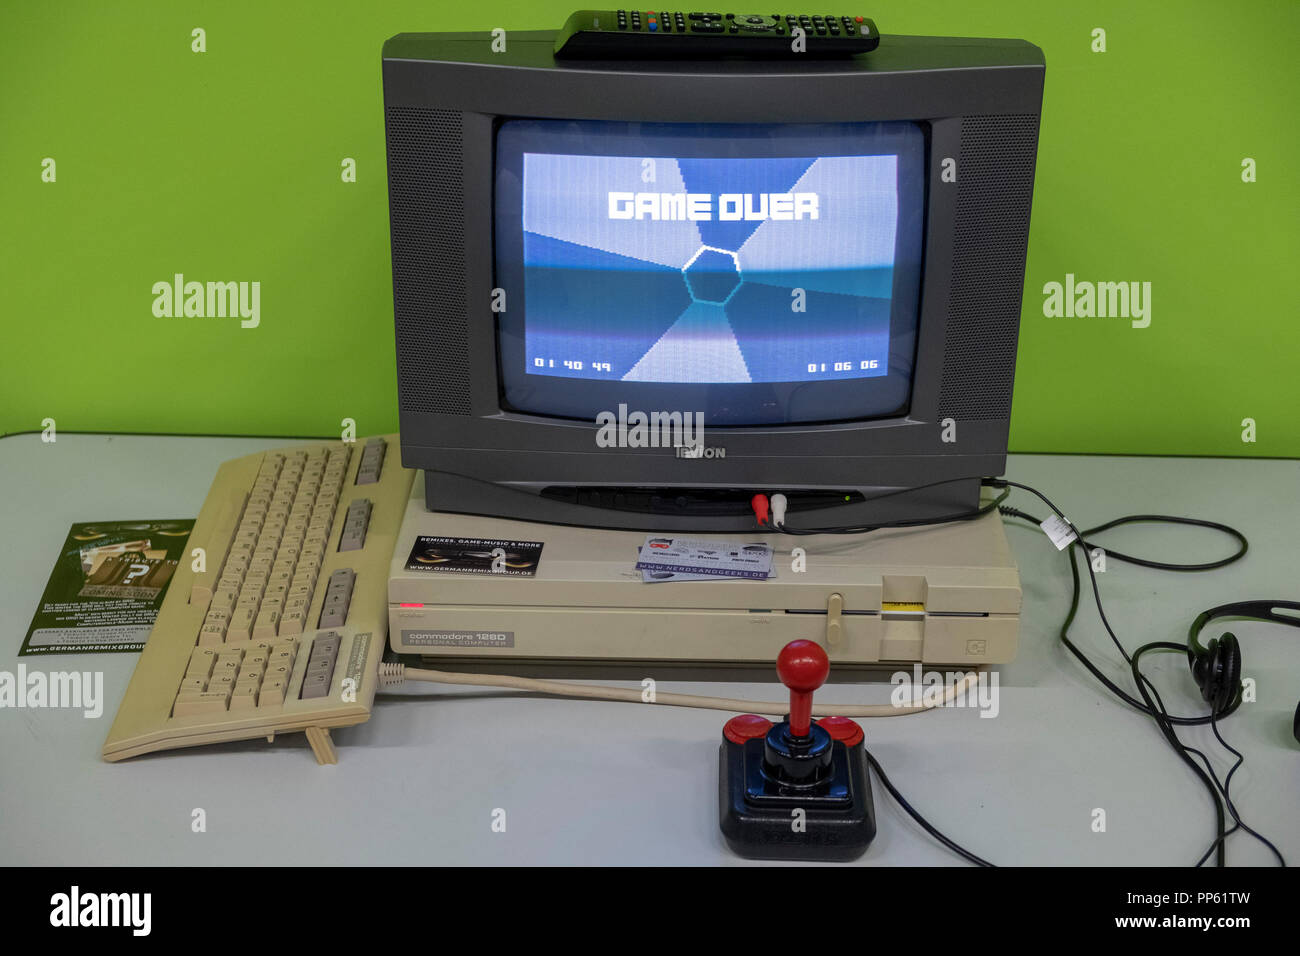 old Commodore 128D personal computer at the world's largest trade fair for computer and video games Gamescom in Cologne, Germany on 24.8.2018 Stock Photo